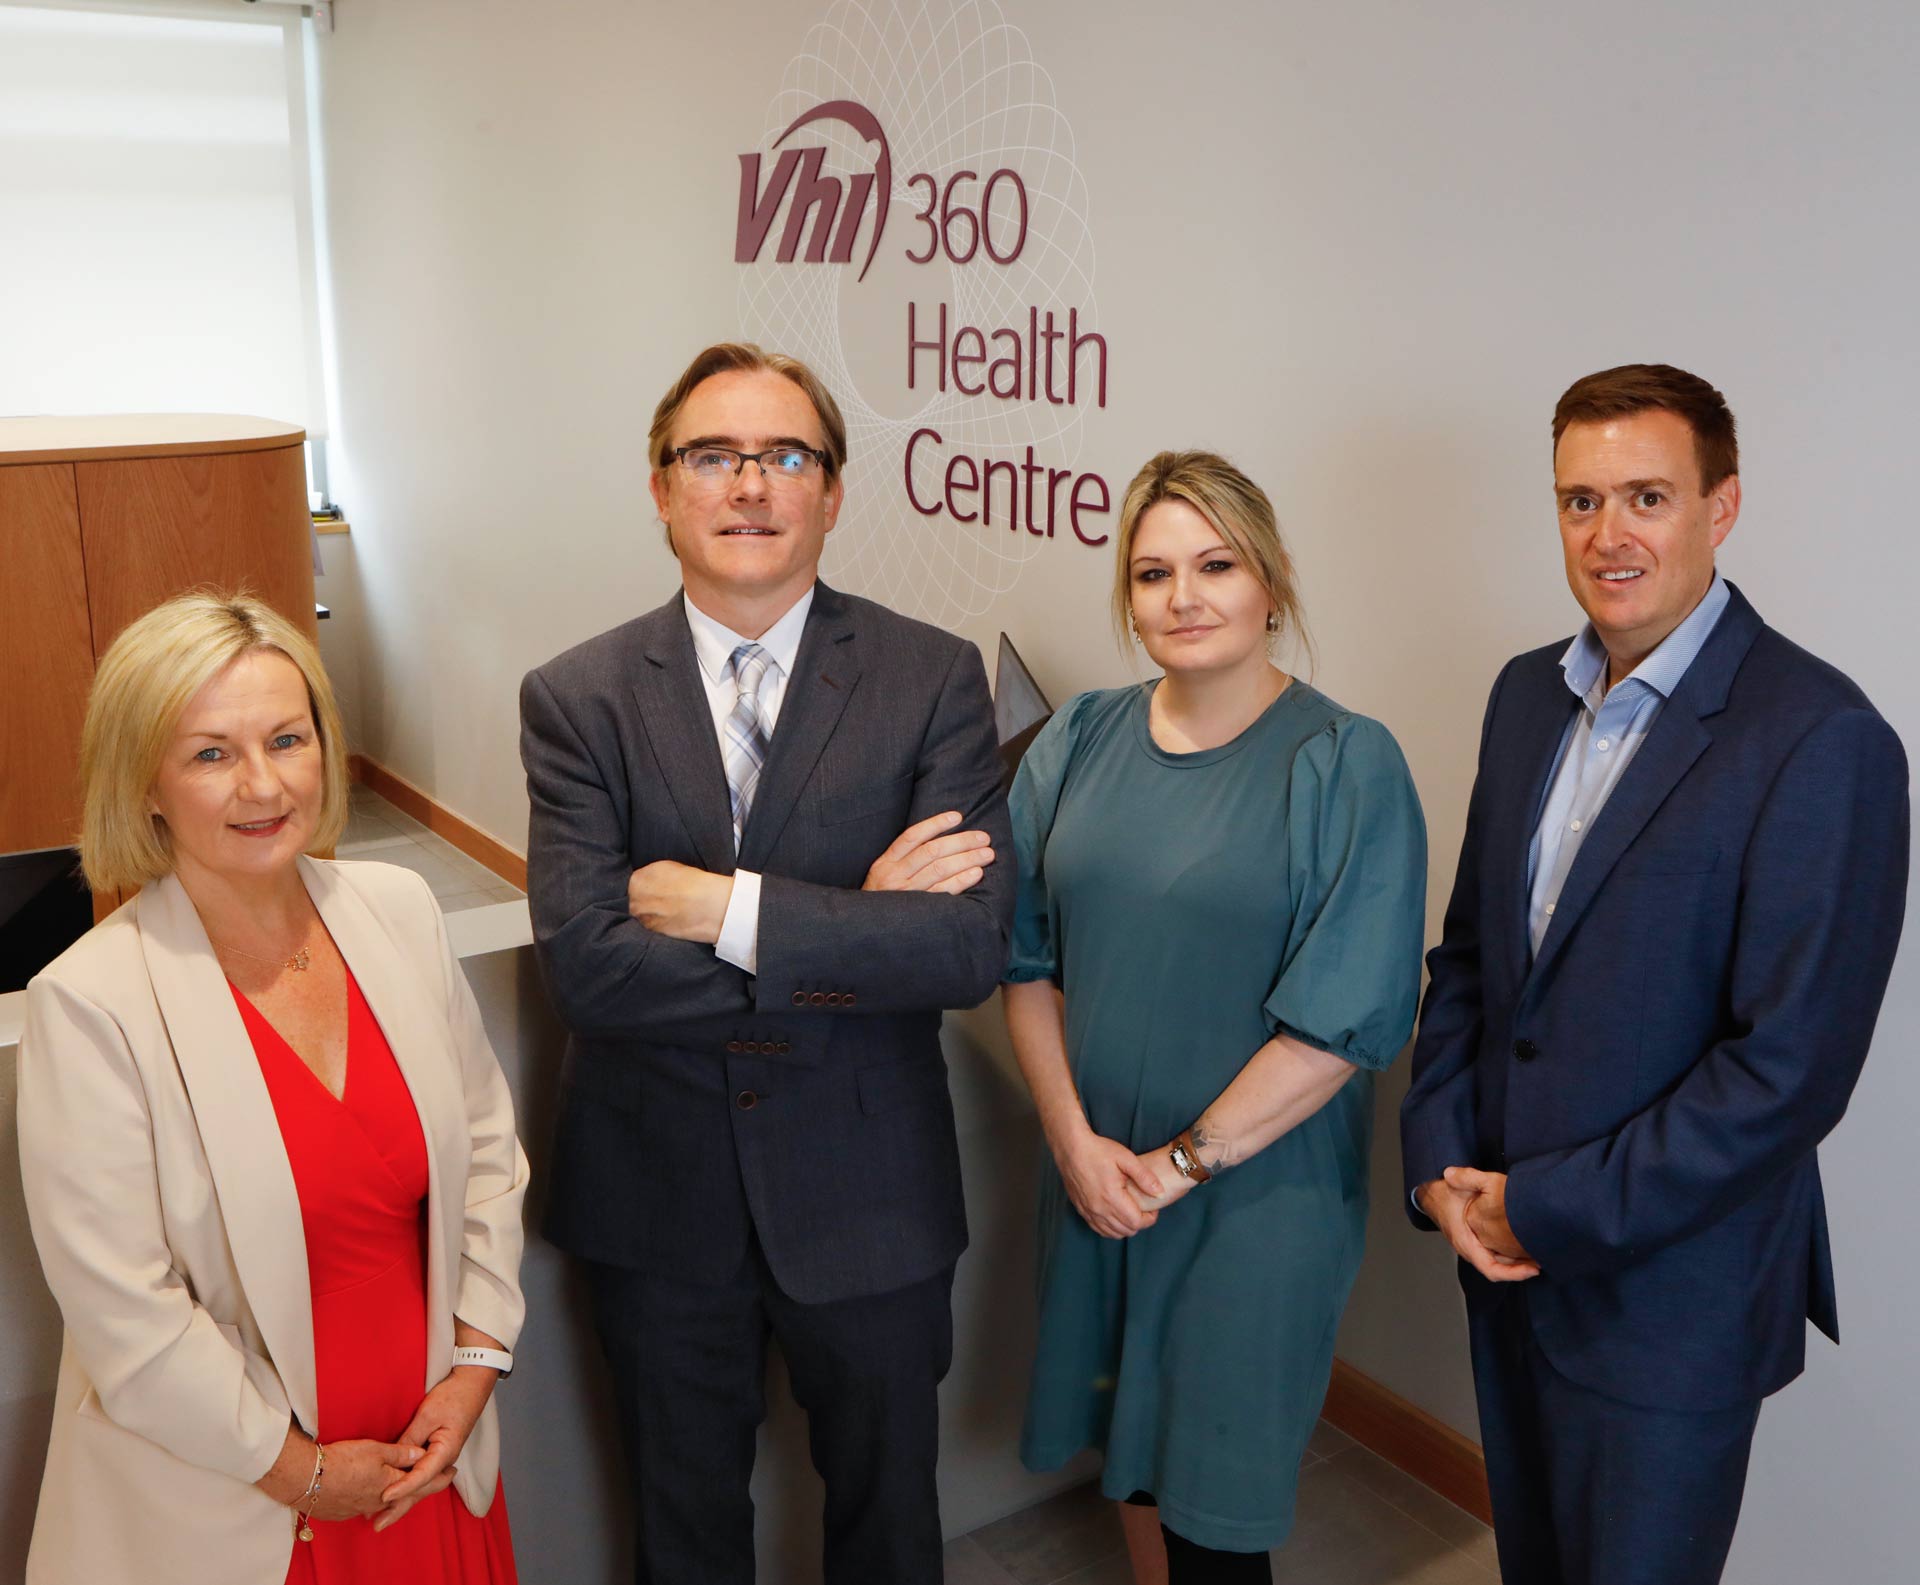 Michele Tait, chief operating officer, Vhi Health and Wellbeing; Dr Rupert Barry, consultant dermatologist and clinical lead for dermatology, Vhi 360 Health Centre Carrickmines; Edina O’Driscoll, head of operations, Vhi 360 Health Centre Carrickmines; and Eoin O’Reilly, chief executive, AllView Healthcare